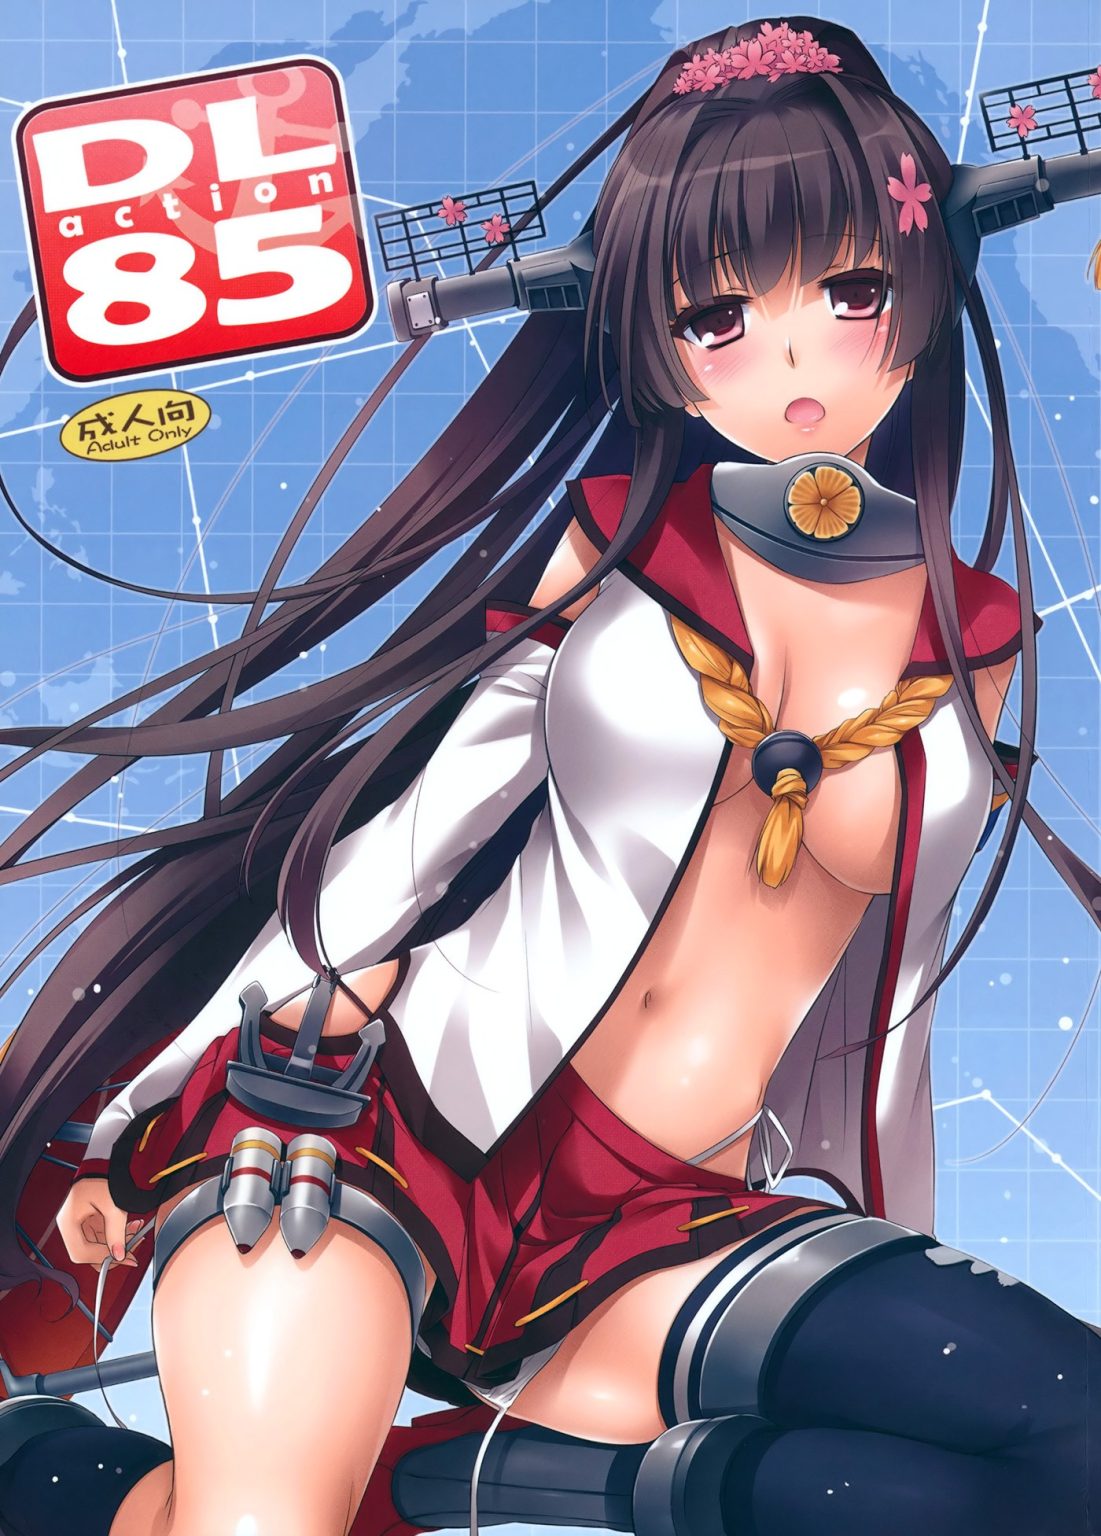 D.L. action 85 hentai manga picture 1